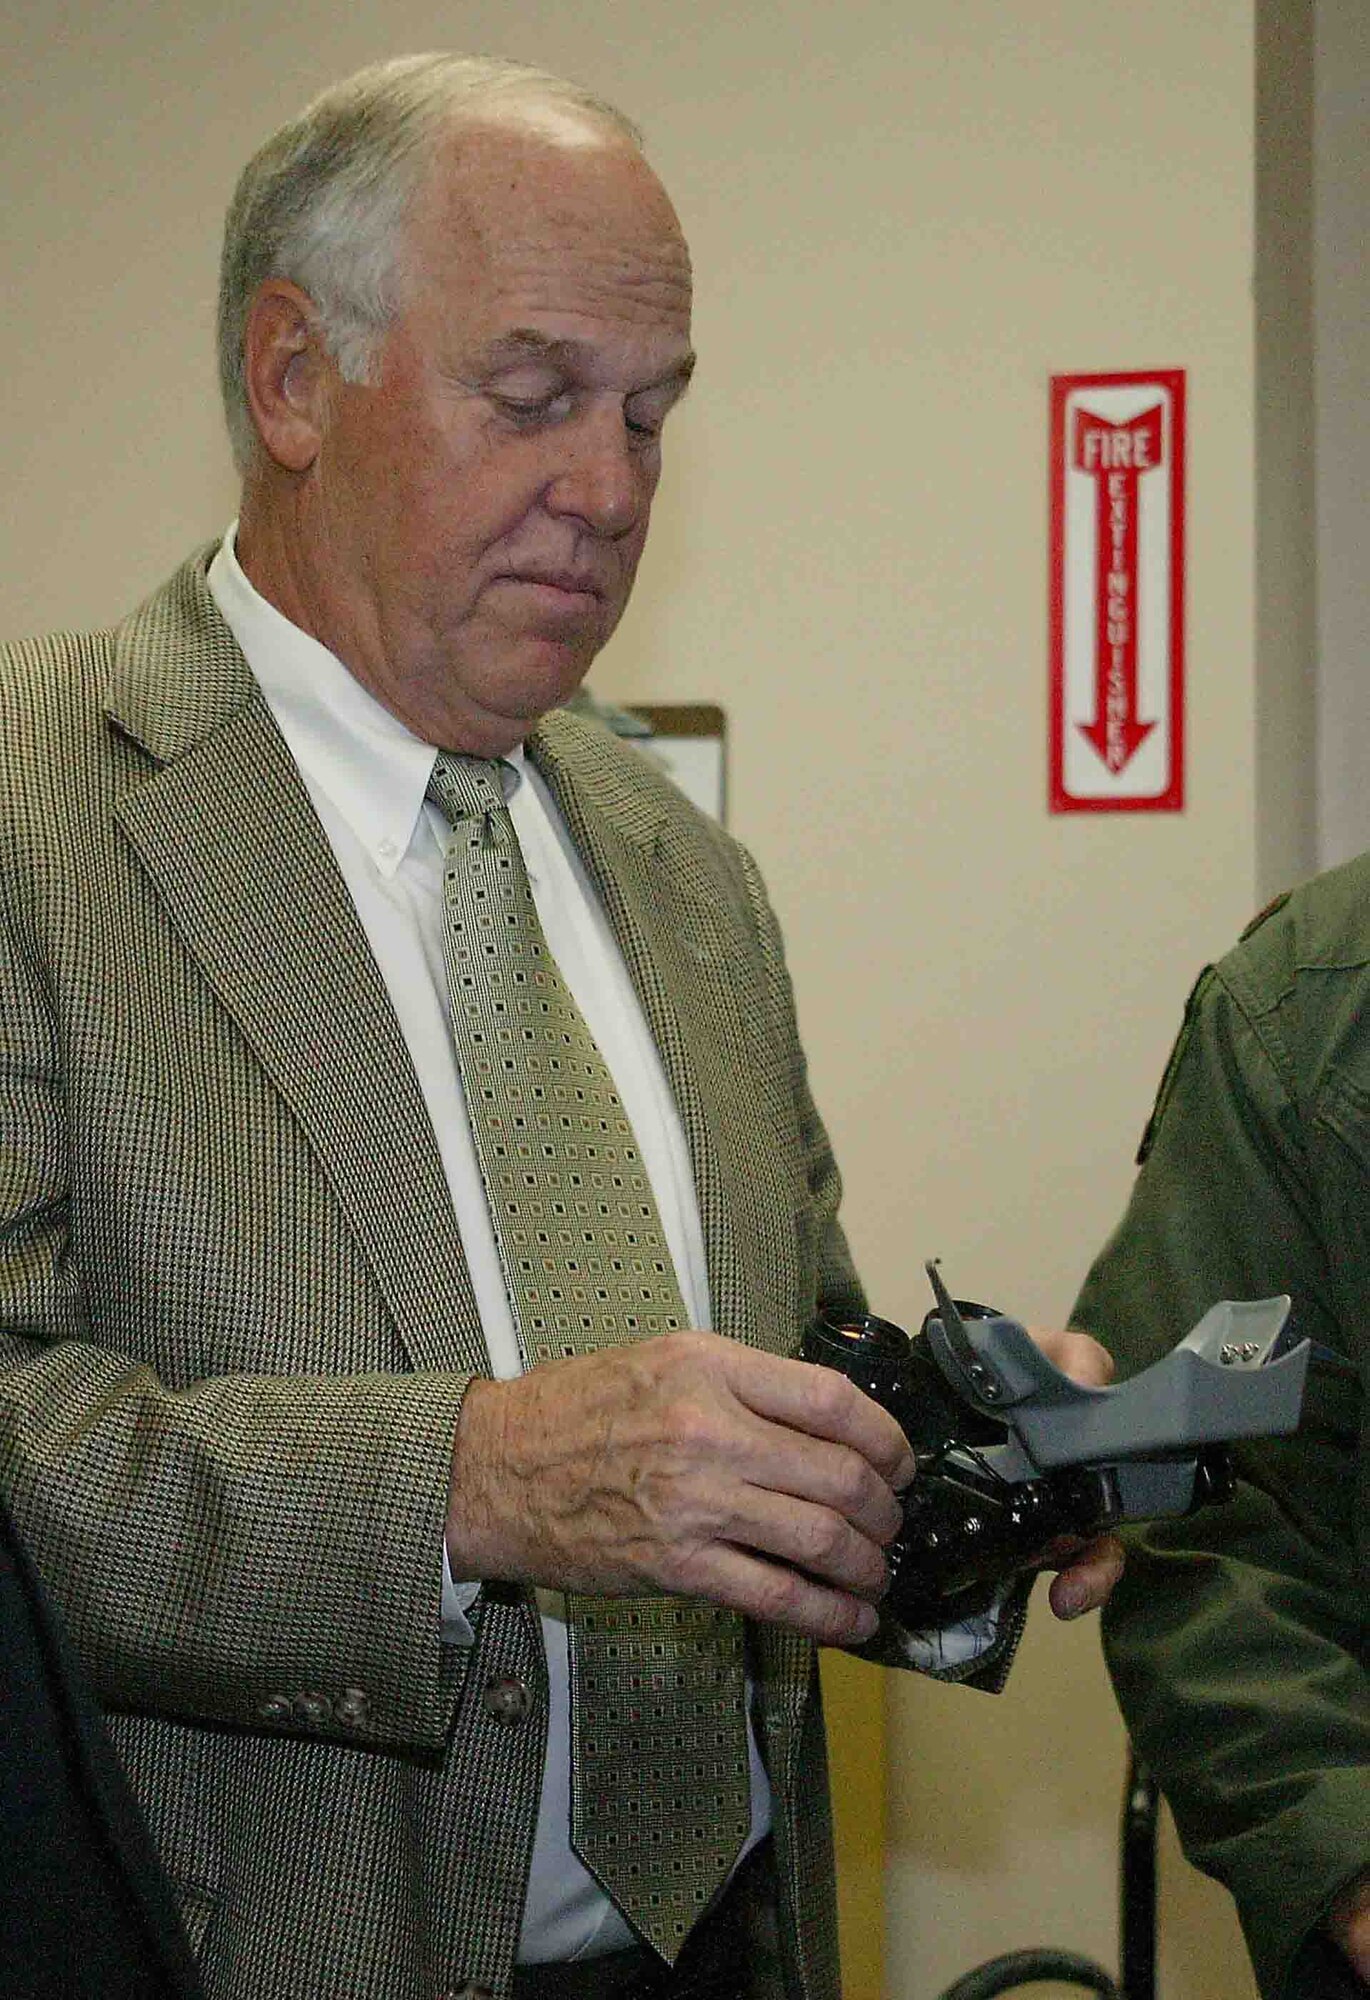 SHAW AIR FORCE BASE, S.C. -- John Peebles, president of the 20th Fighter Wing Association, reviews a pair of night-vision goggles April 23 during a tour of the 55th Fighter Squadron. During the visit, Mr. Peebles also met with wing leaders and other fighter pilots. The 20th FW Association is composed of former members of the wing, its subordinate organizations and its predecessors to promote the history of the unit. The 20th FW traces its lineage to the 20th Pursuit Group which was later absorbed by the 20th Fighter Bomber Wing. The 20th was one of the 13 original combat air groups formed by the Army before World War II.  (U.S. Air Force photo/Senior Airman John Gordinier)